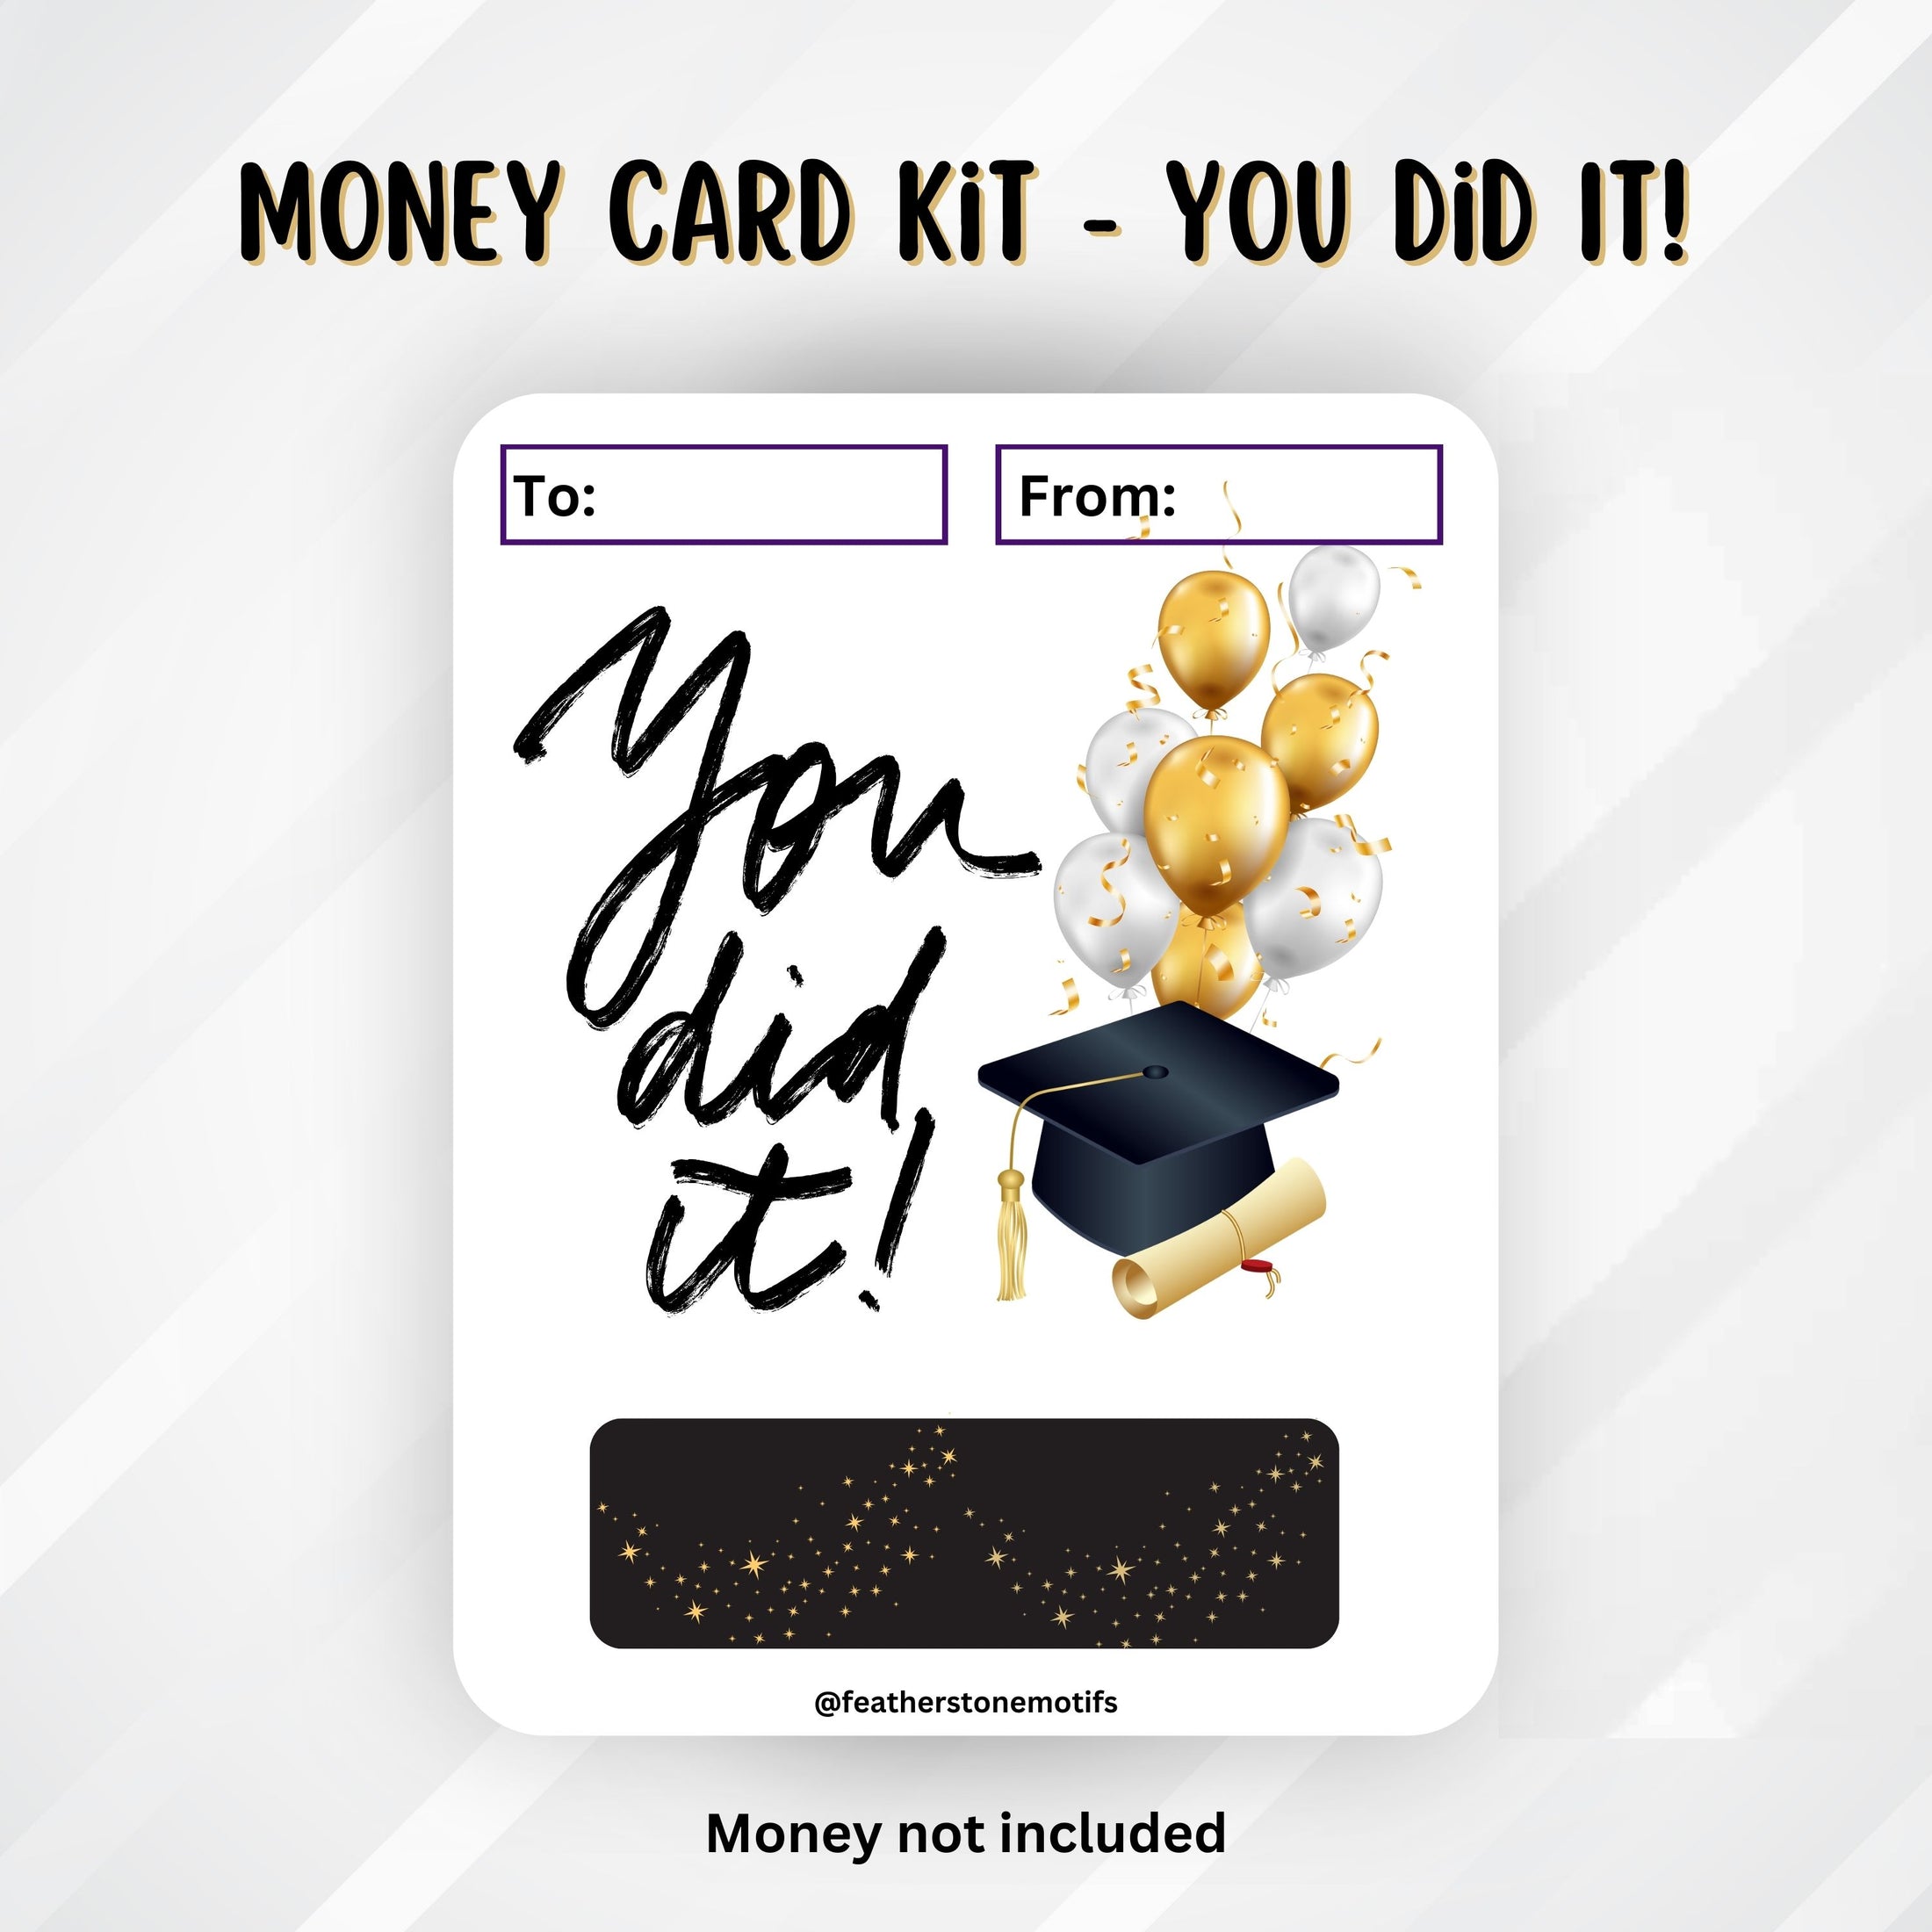 This image shows the You Did It! Money Card without the money tube.